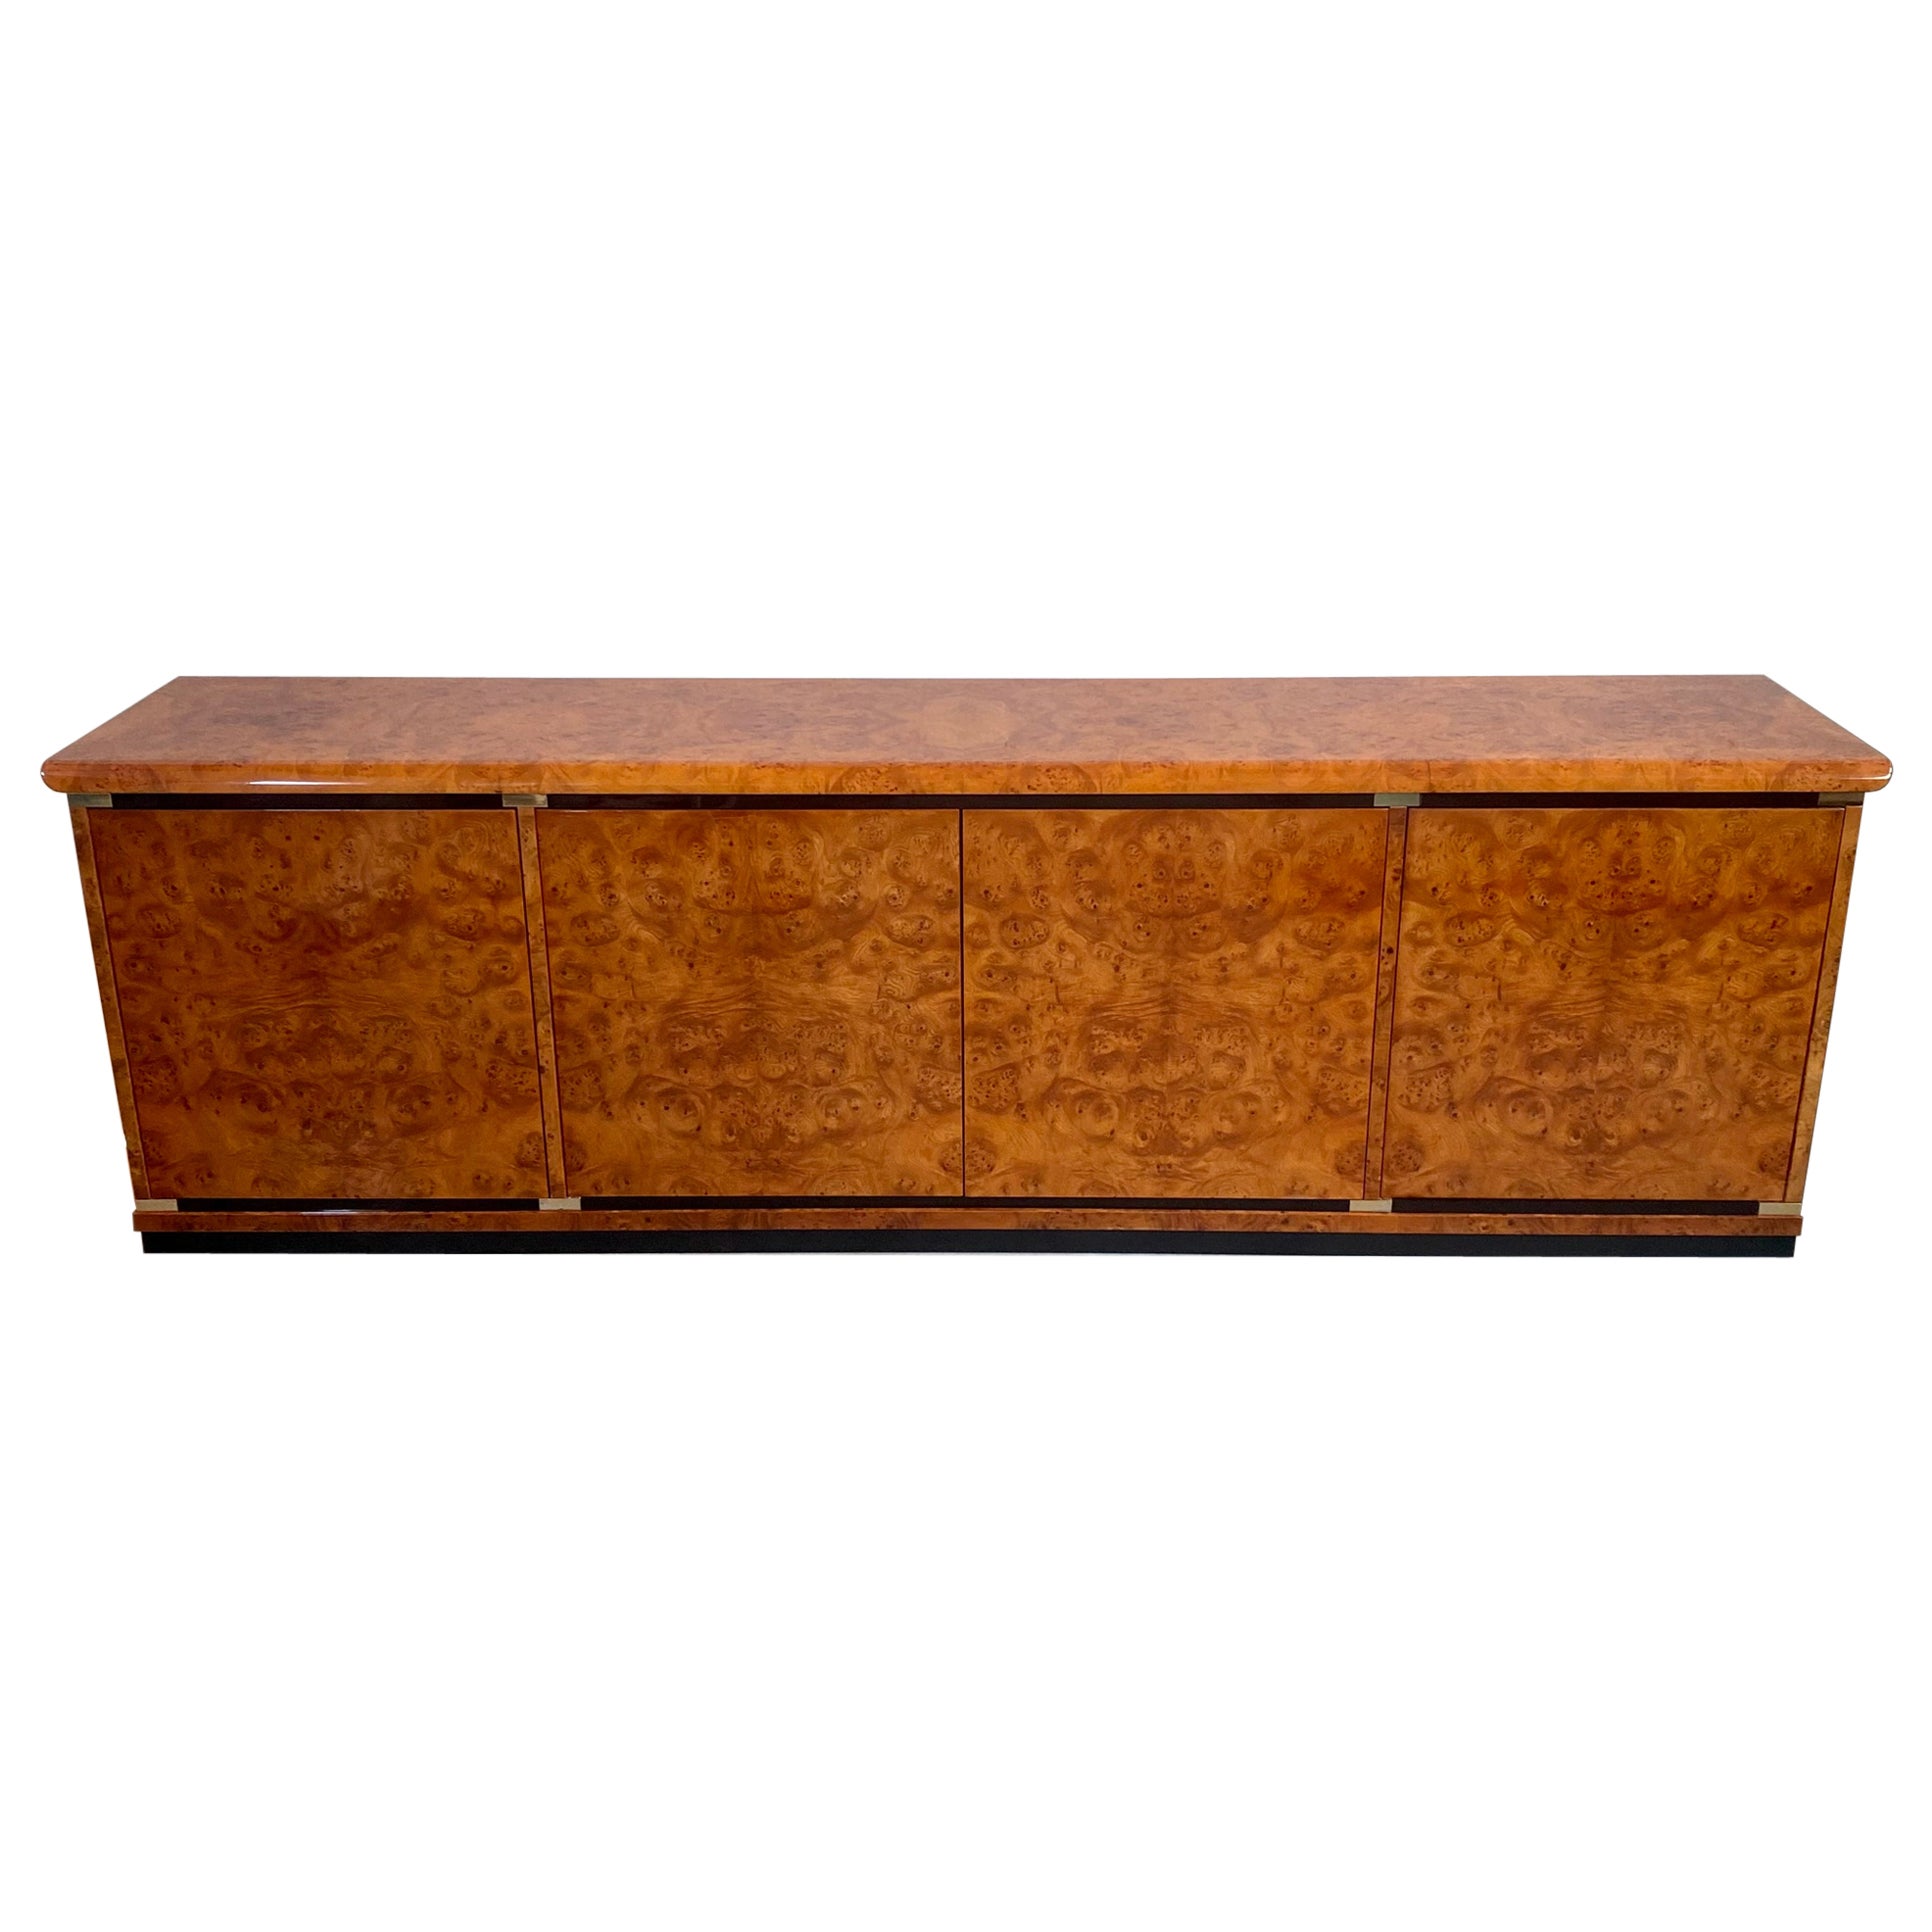 Briar Burl Wood Sideboard by Guerini Emilio for Gdm 24 Kt Gold Plated Italy 1980